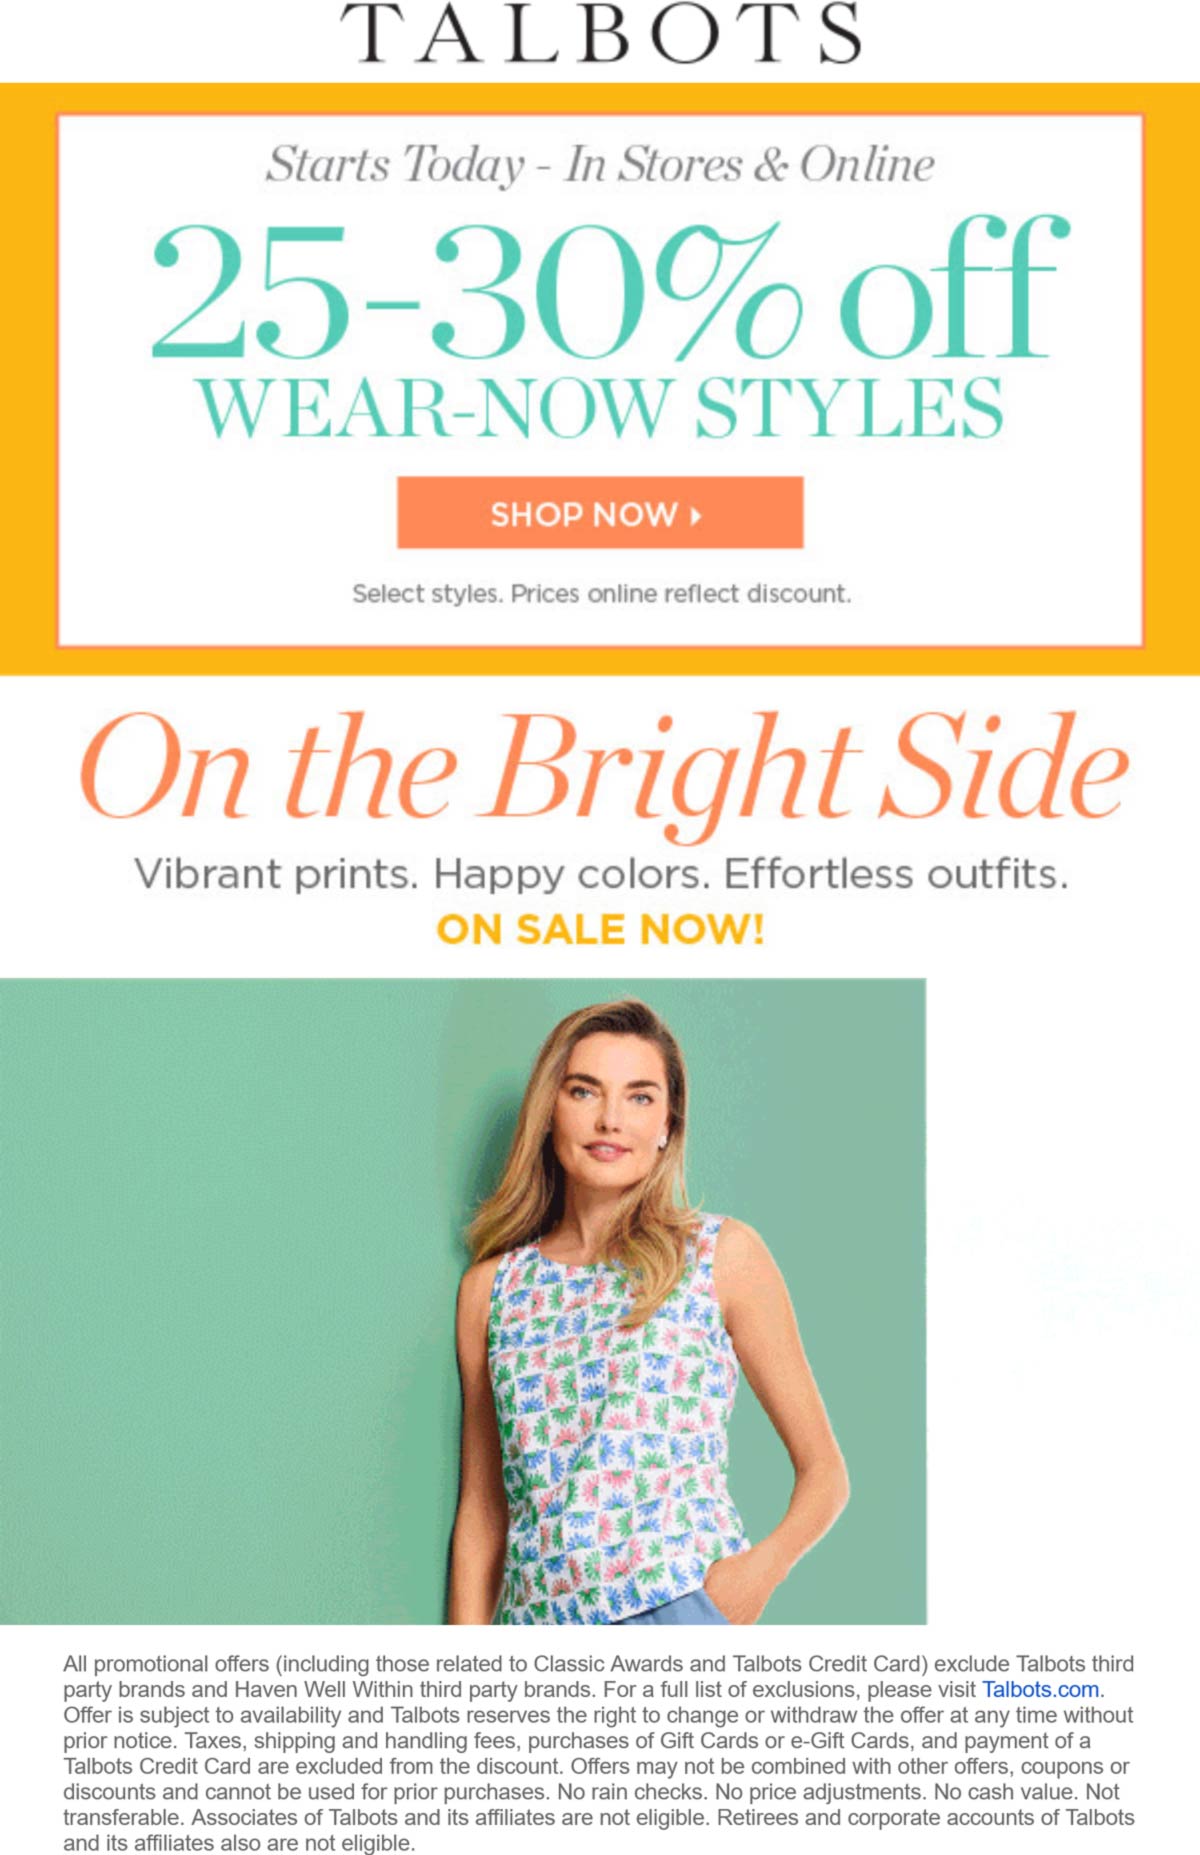 Talbots stores Coupon  25-30% off wear now styles at Talbots #talbots 